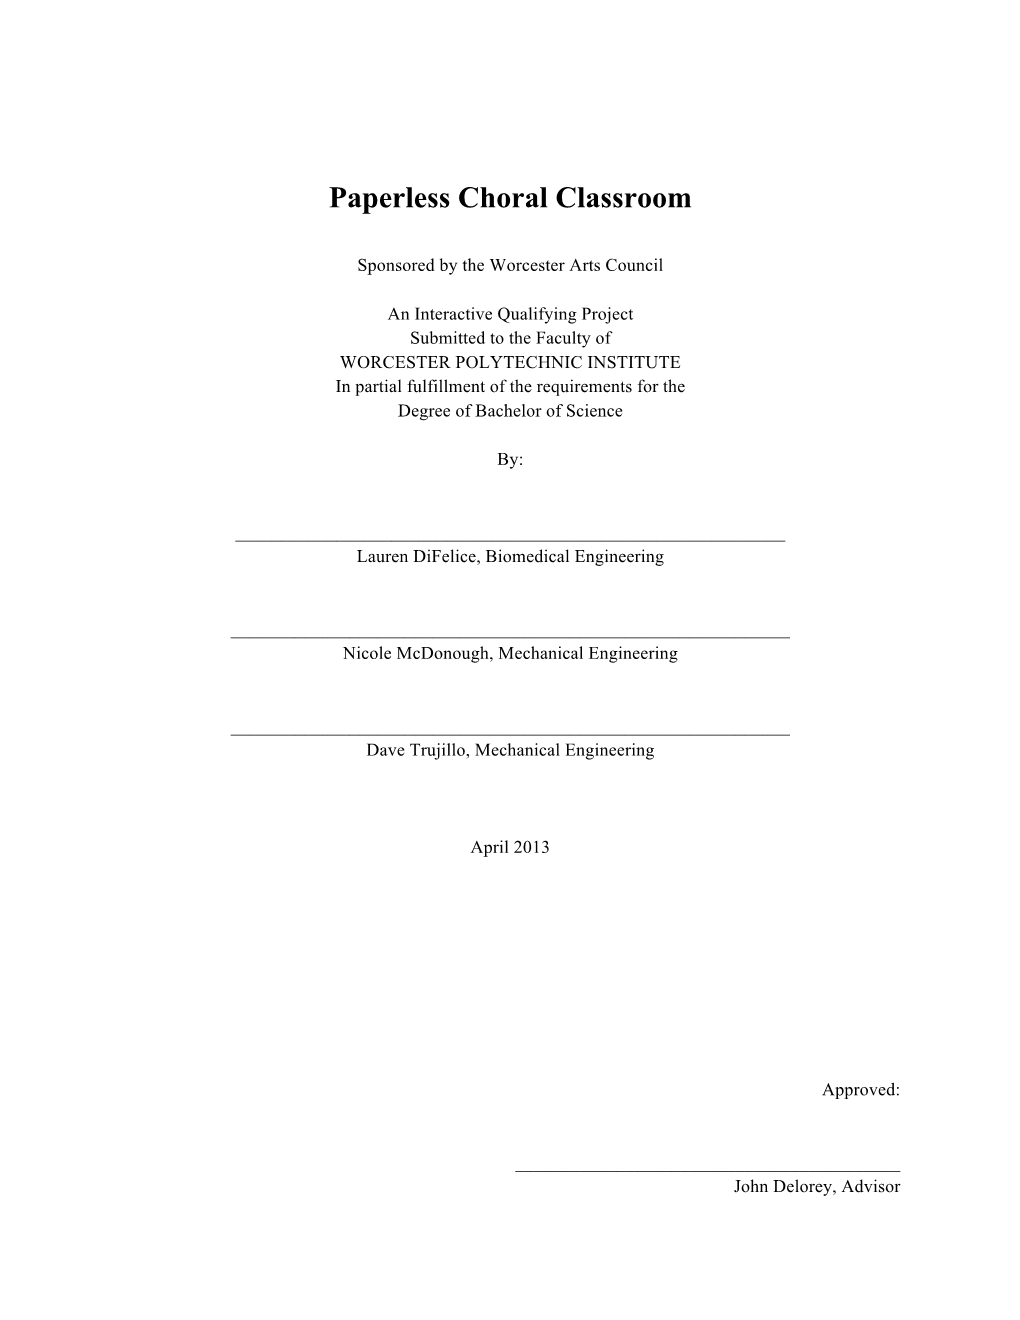 Paperless Choral Classroom